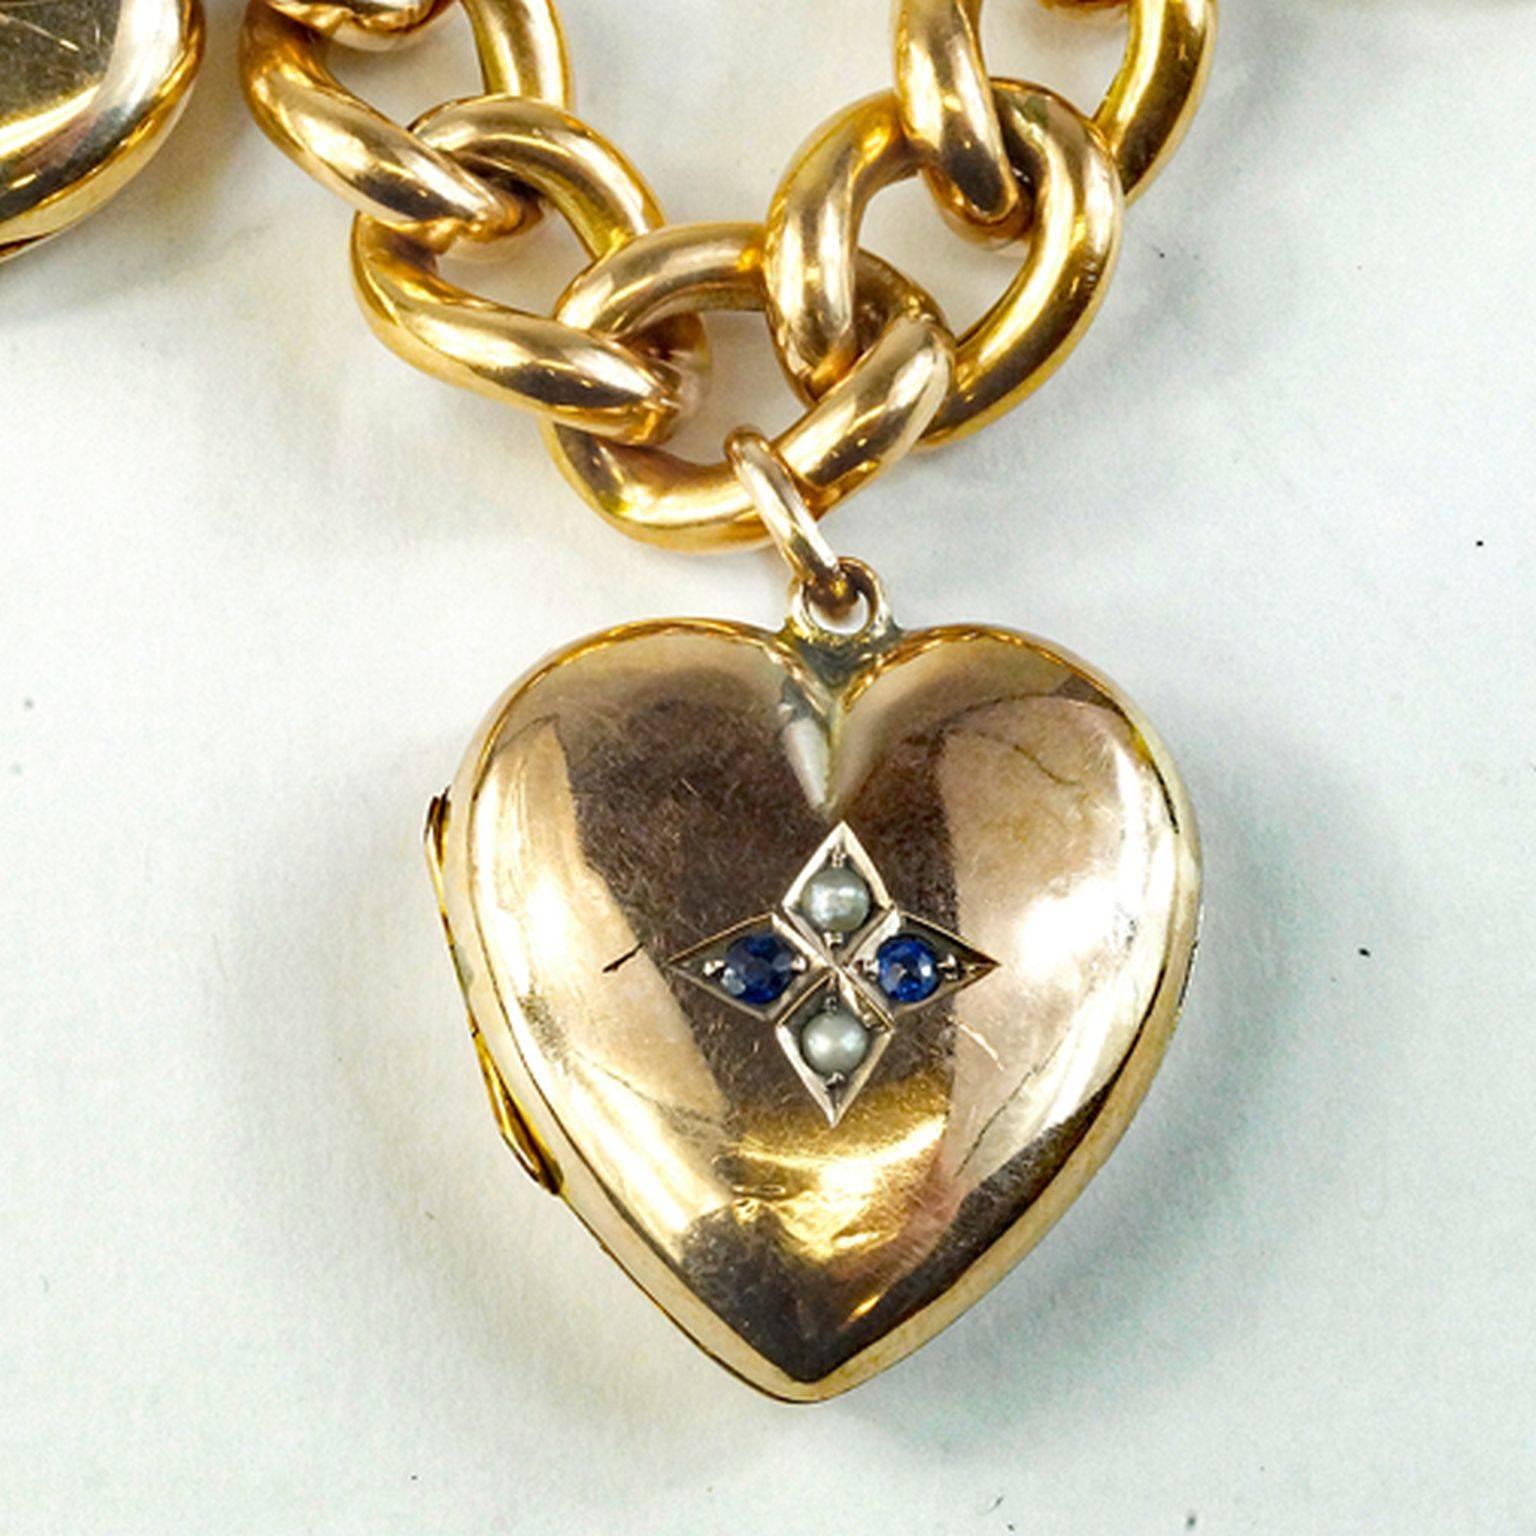 Incredible antique heart charm/locket bracelet five charms each with its own original motif and each 1 inch in diameter.  A classic 9 kt yellow gold 11 mm curb link chain bracelet that fastens with a gold pad lock heart as the clasp. Bracelet is 7